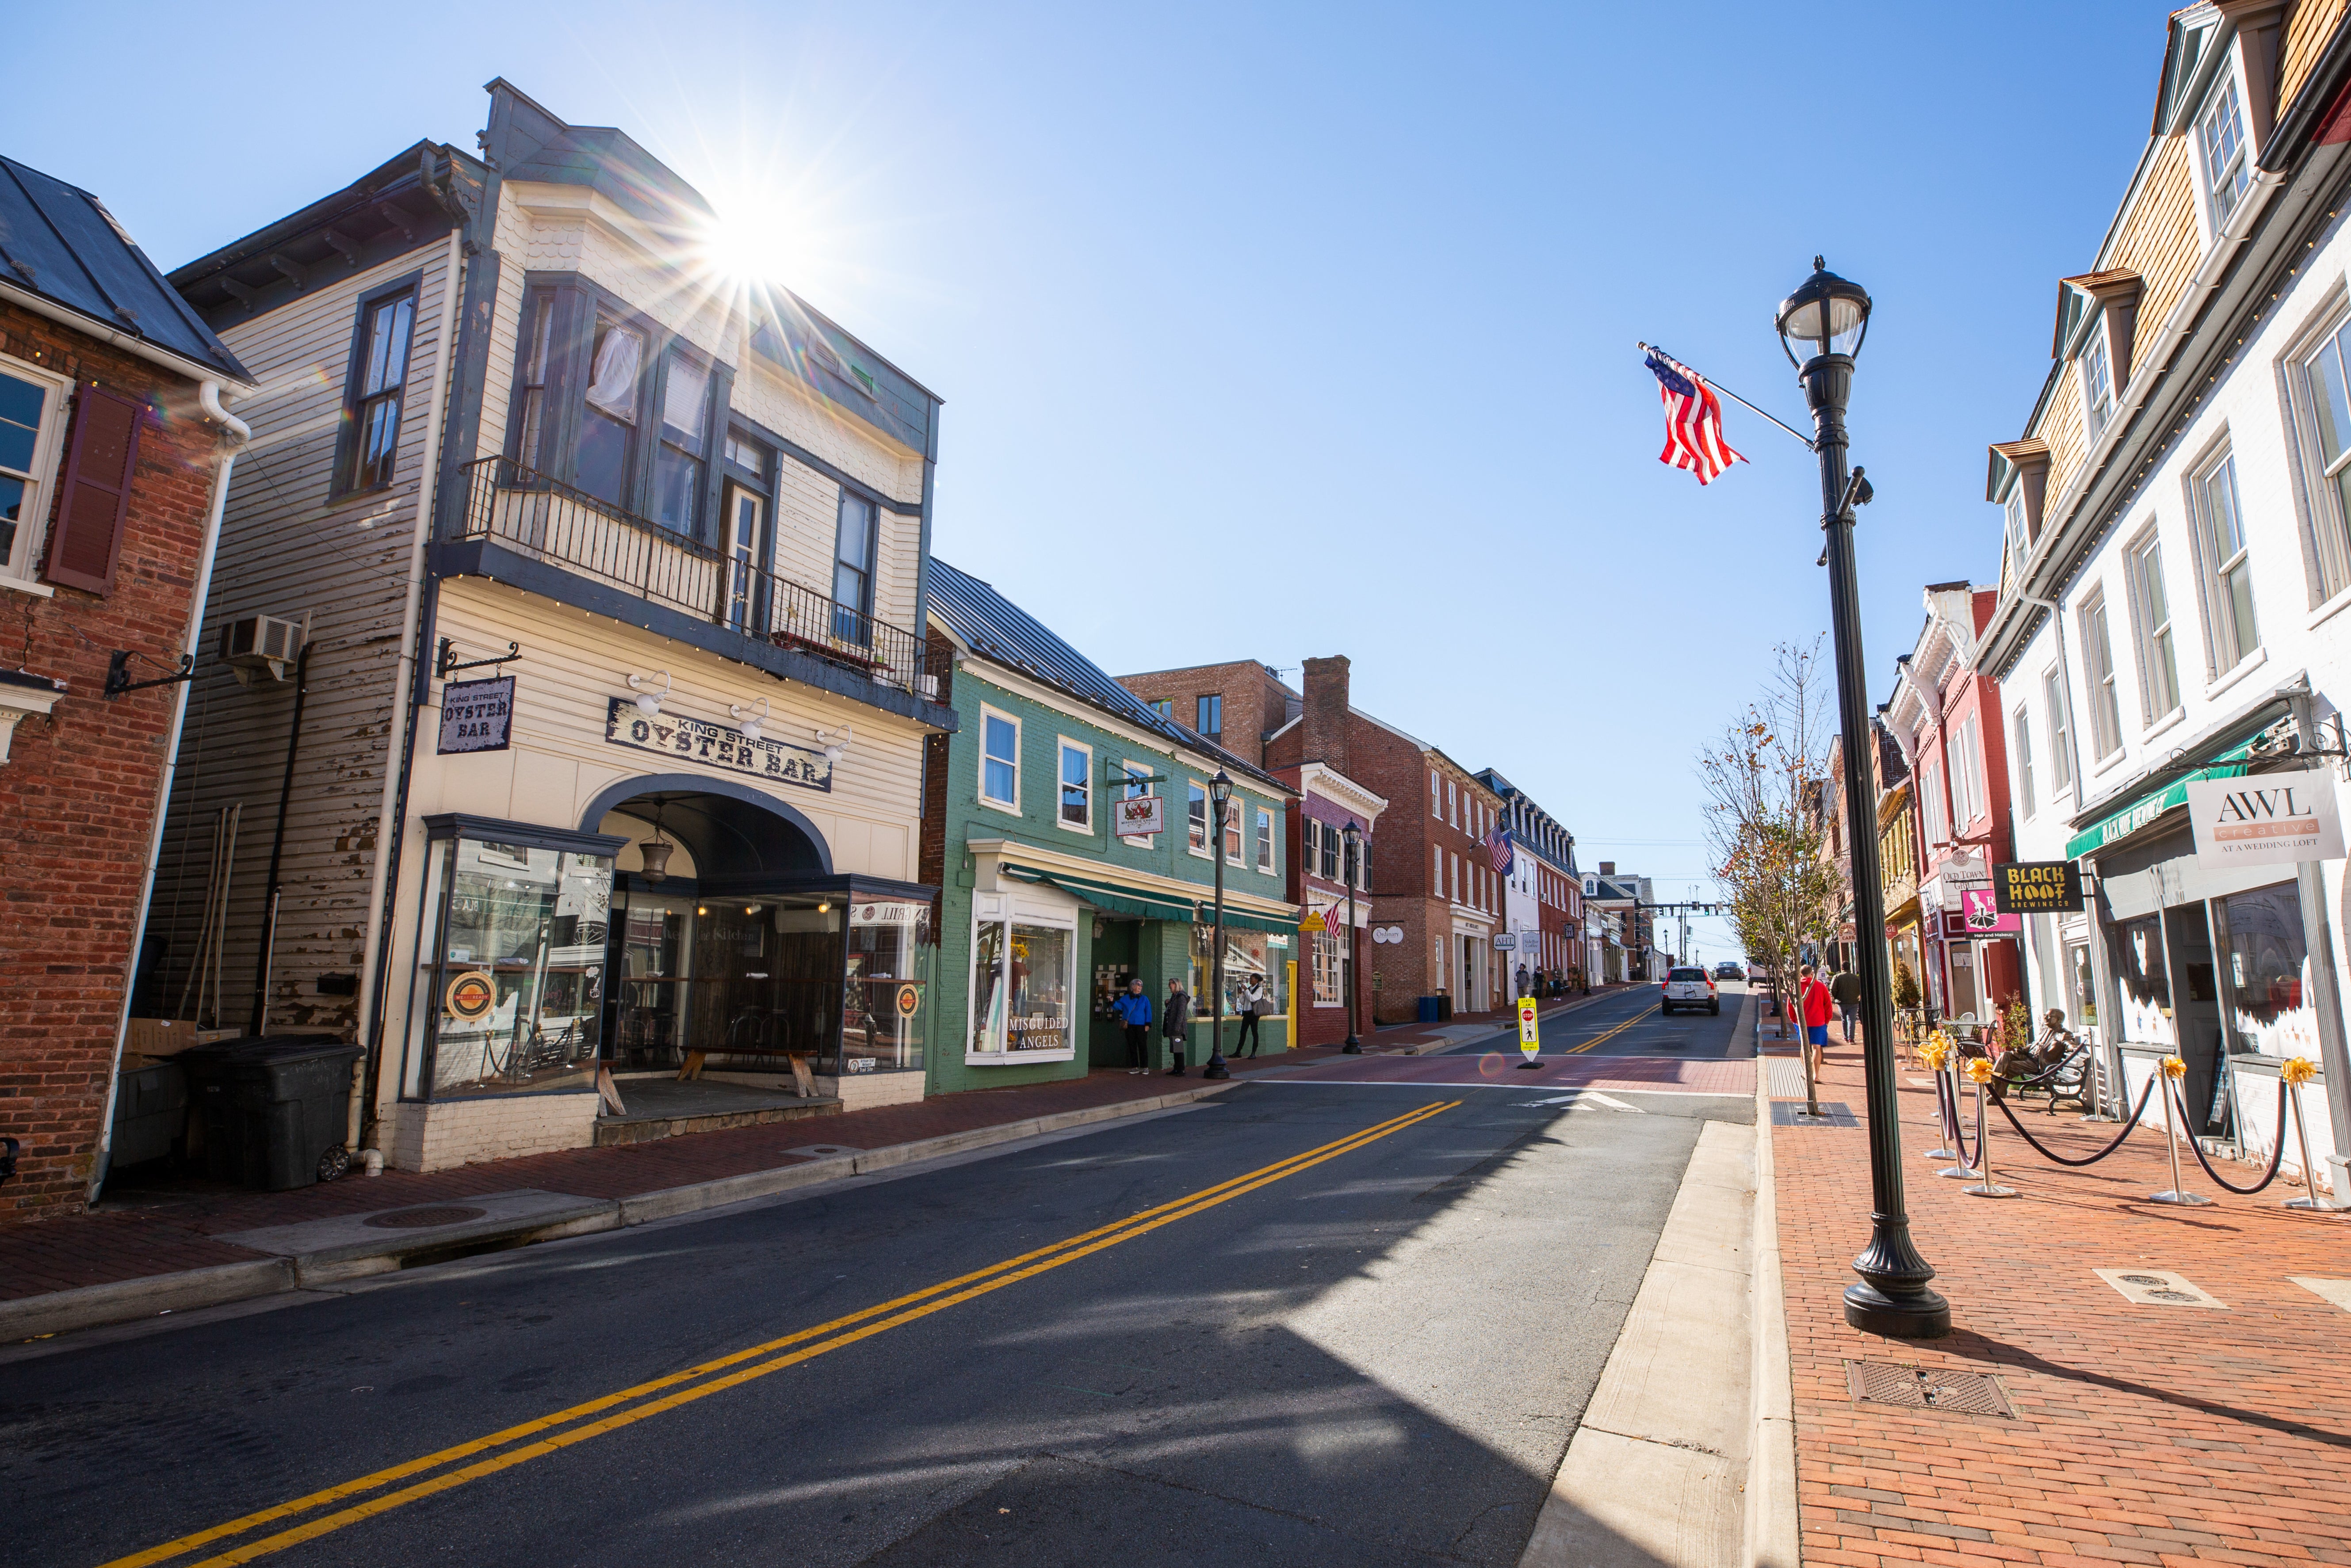 Vibrant Leesburg punches above its weight with things to see and do